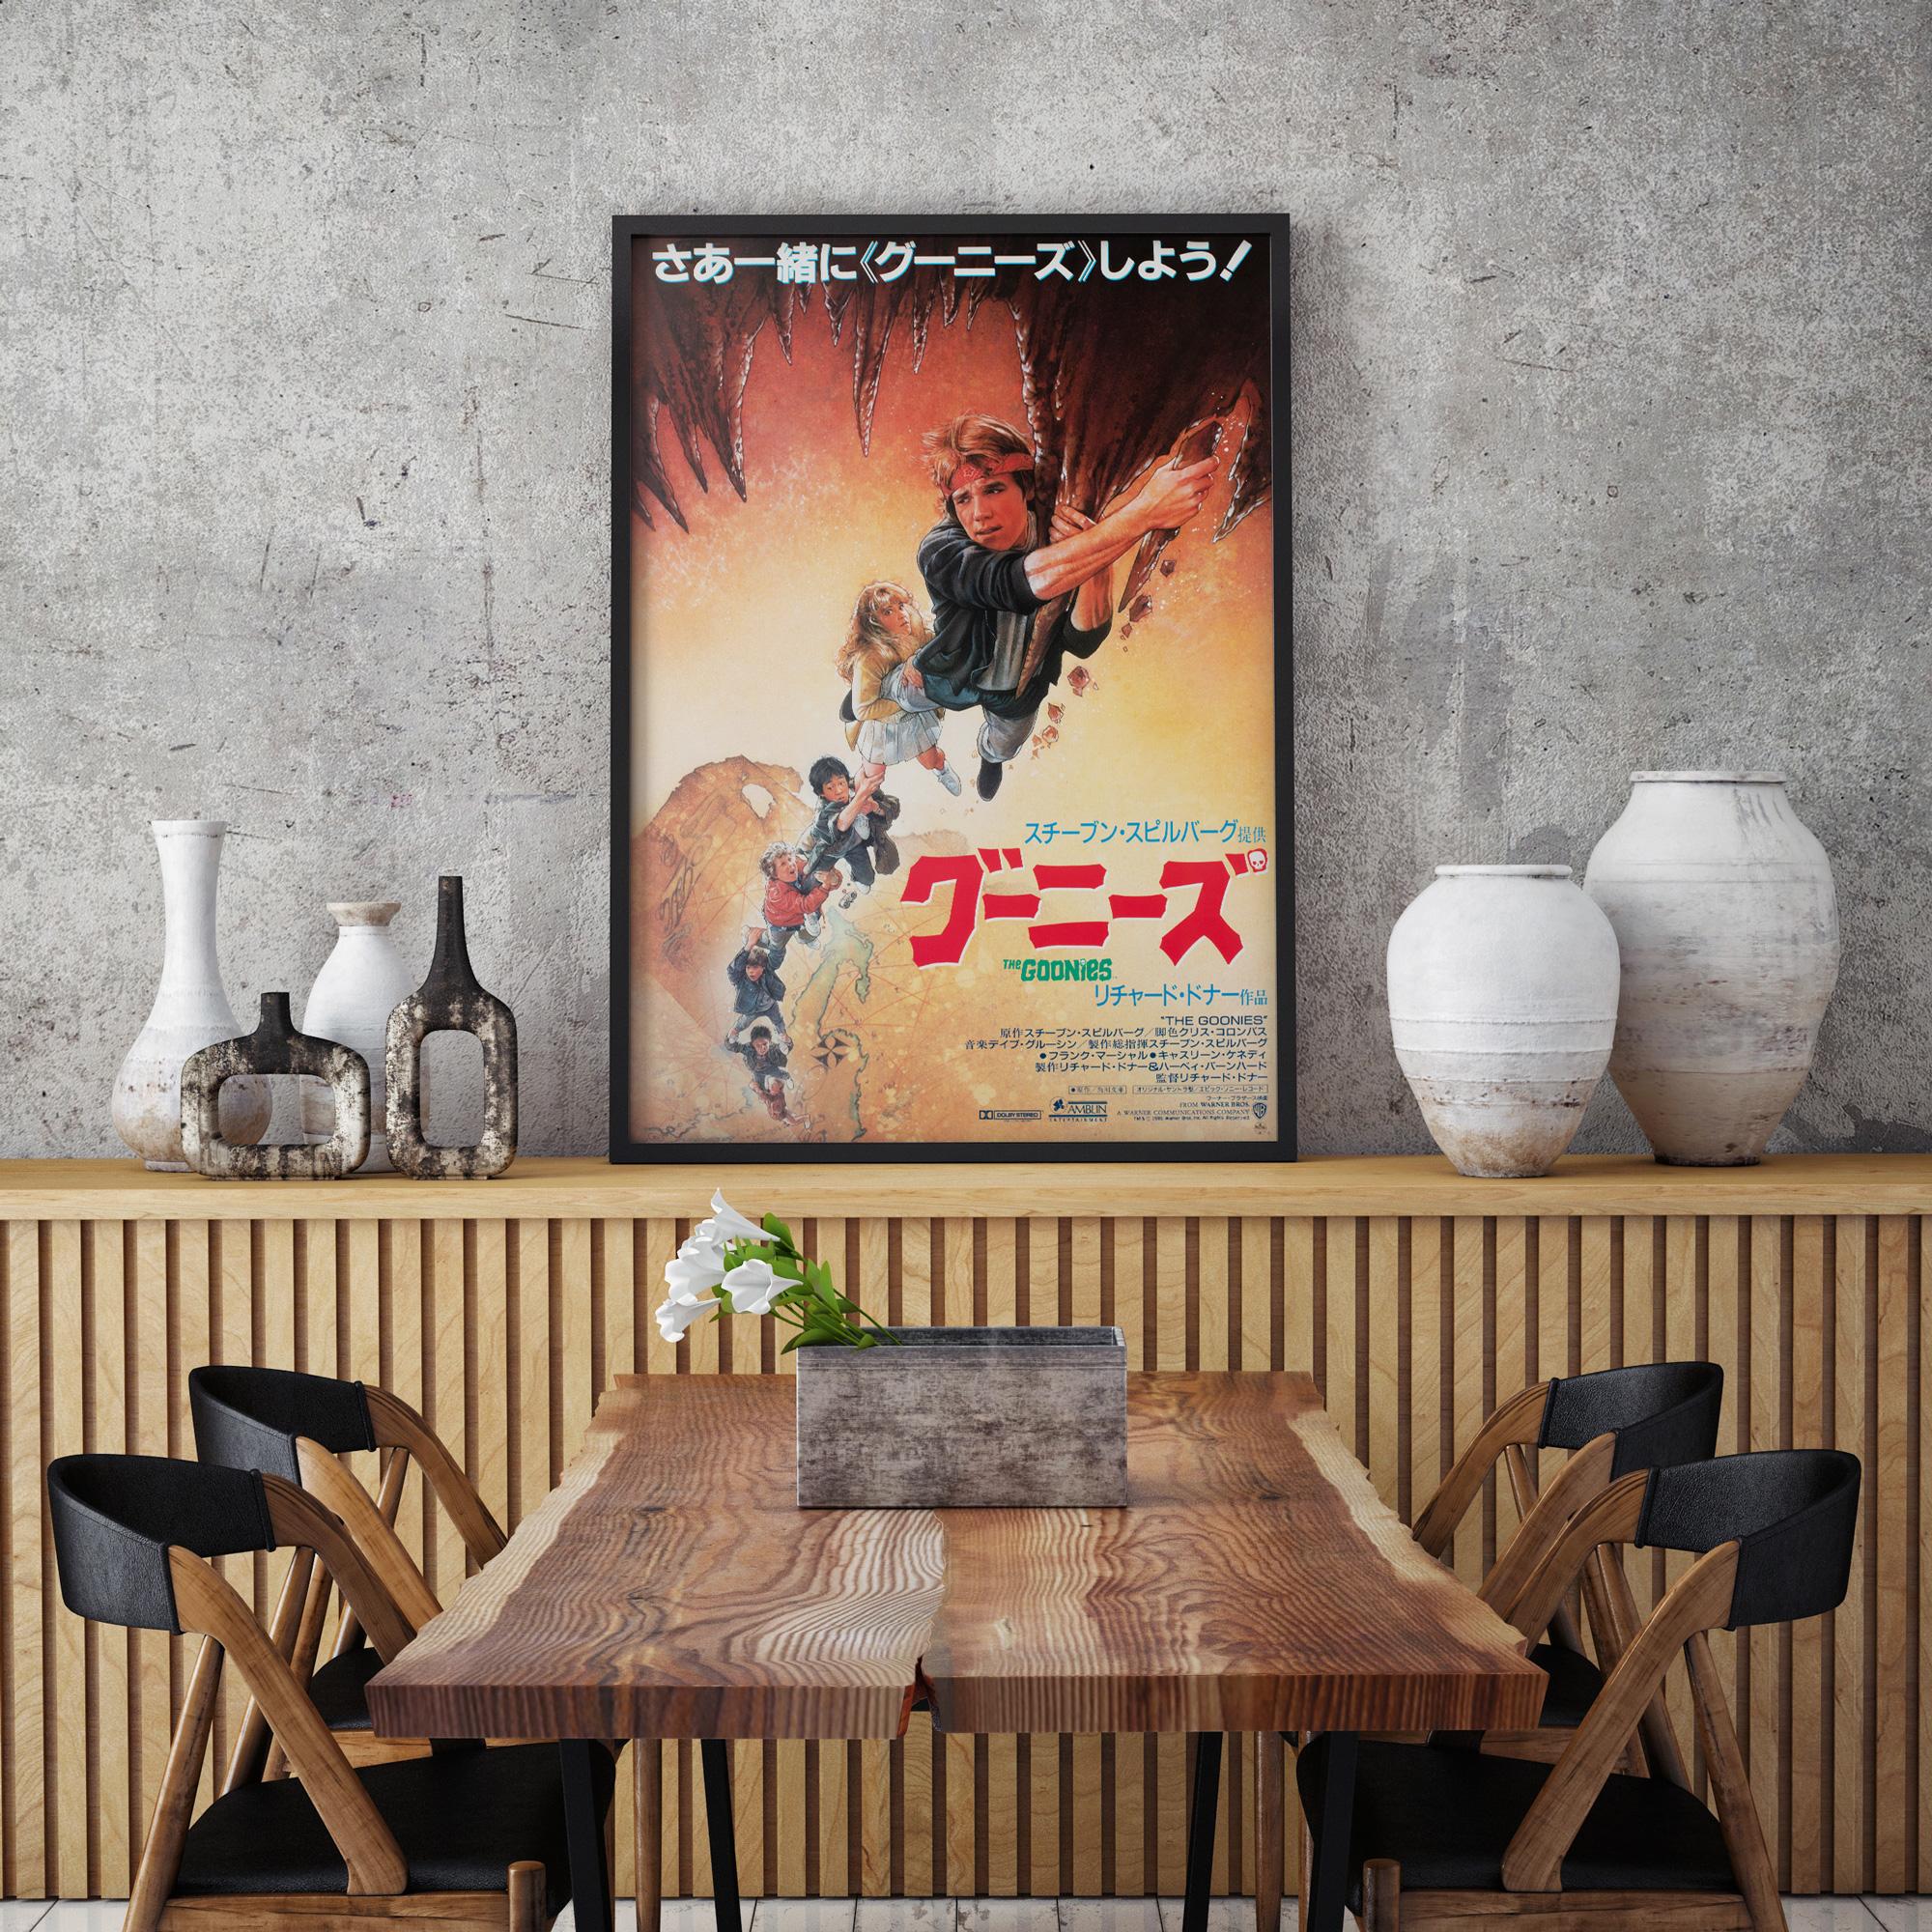 Hey you guys!

We've got the fab original first-year-of-release Japanese film poster for 80s firm favourite The Goonies. Drew Struzan's iconic design looks even cooler with the Japanese typography. 

This vintage movie poster is sized 20 1/4 x